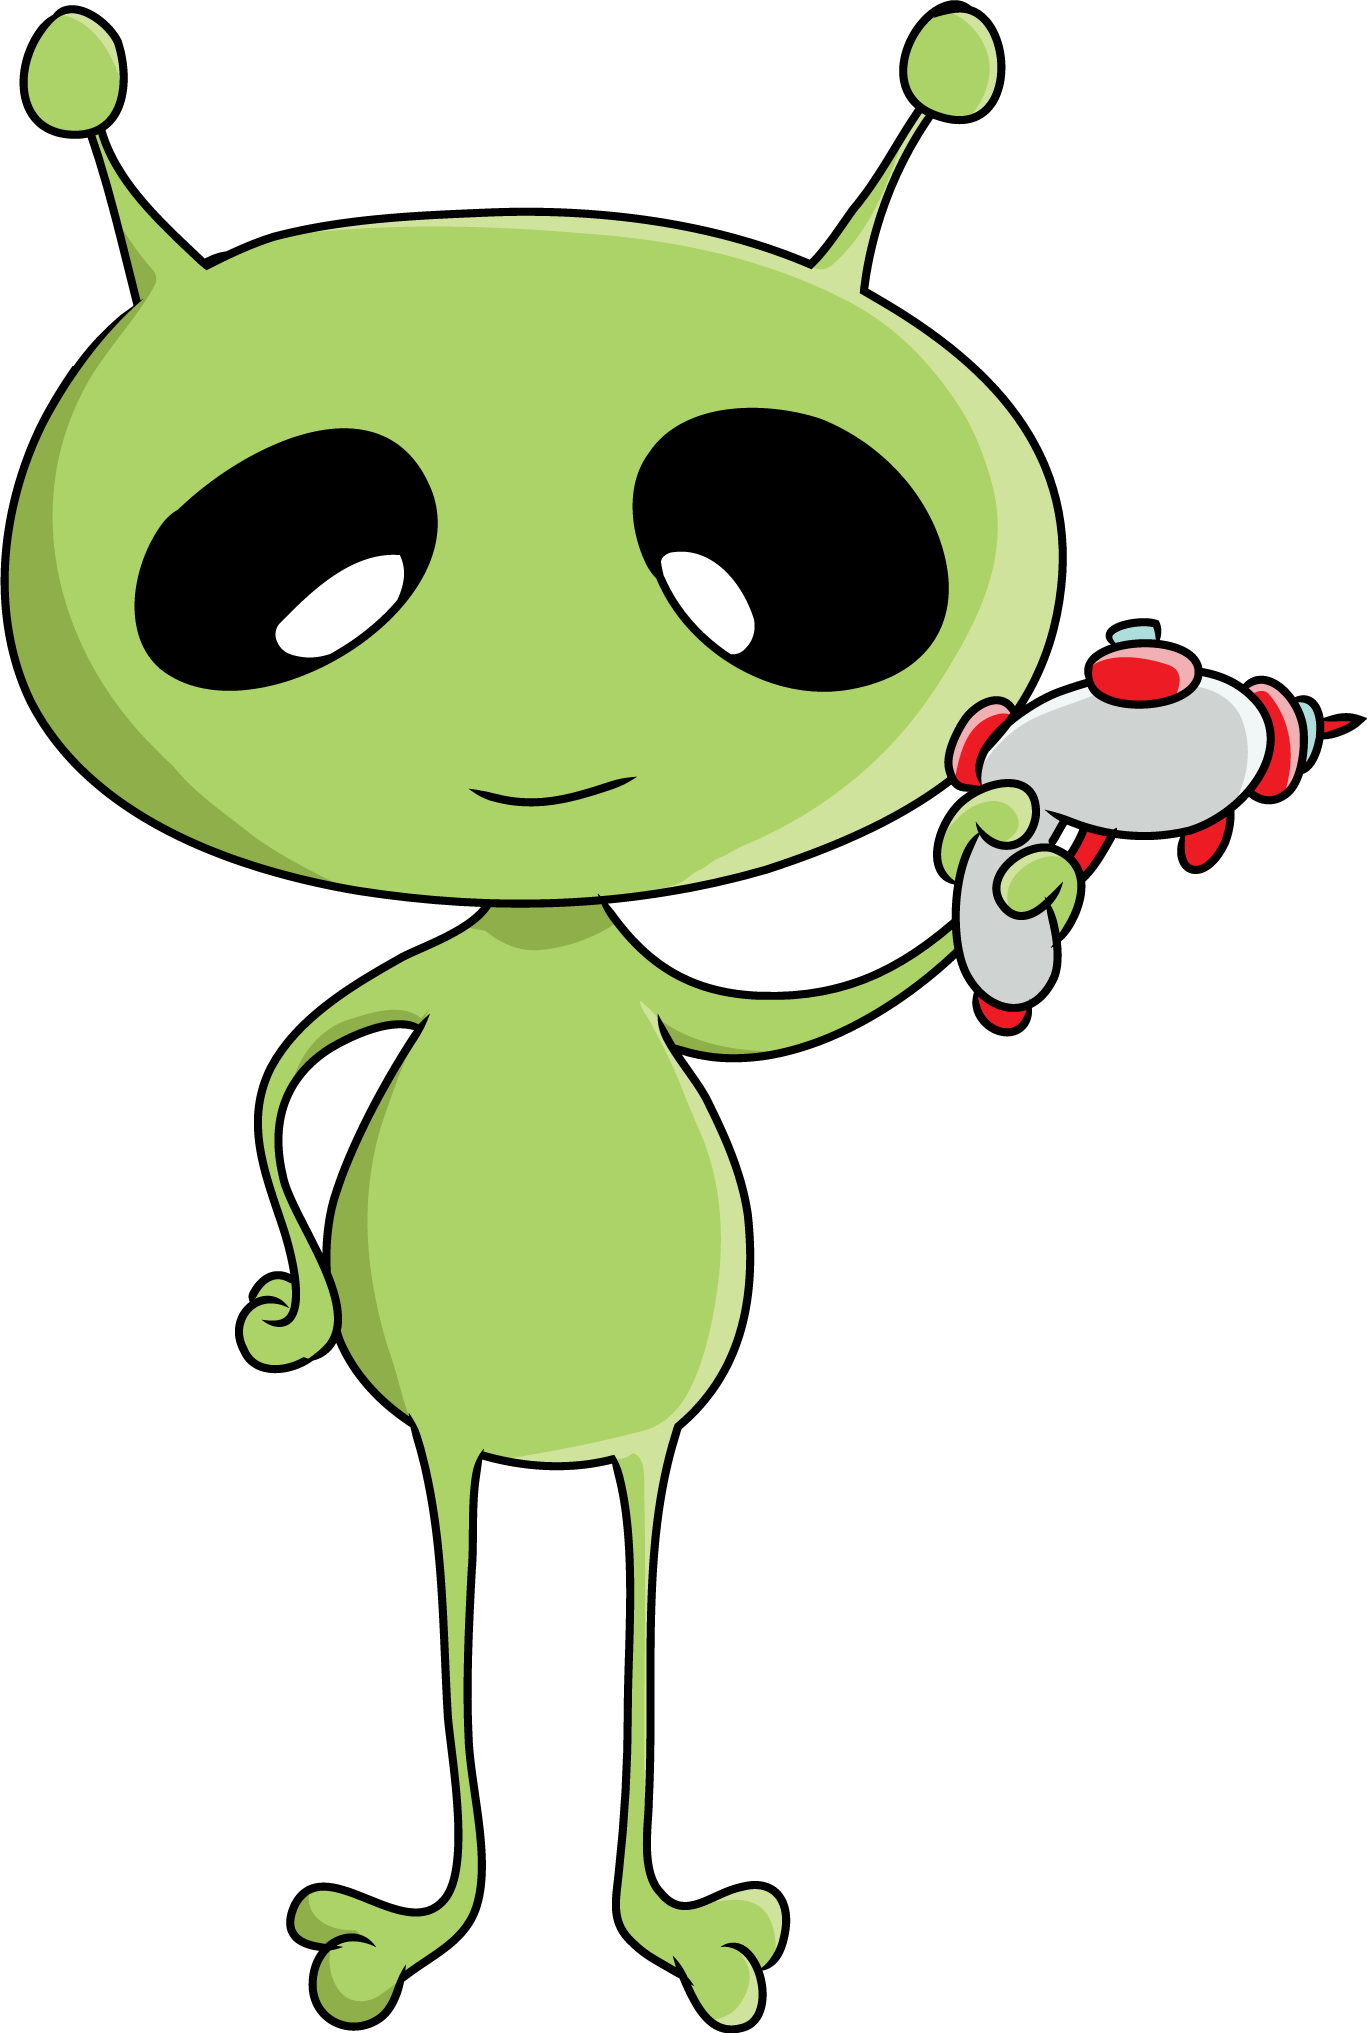 Free Cartoon Alien Pictures, Download Free Clip Art, Free.